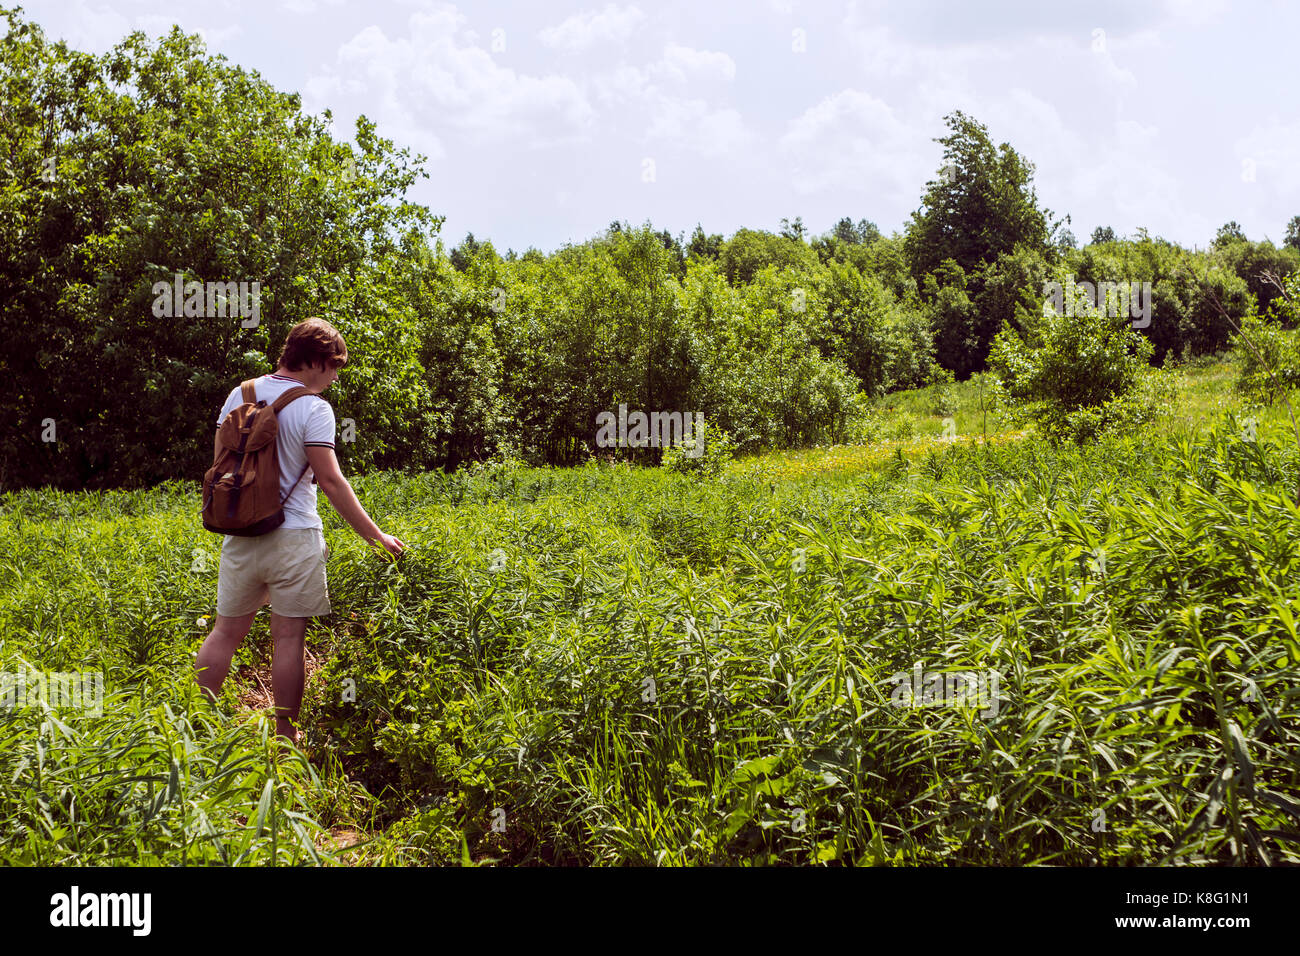 Young male hiker looking at green plants in landscape Stock Photo